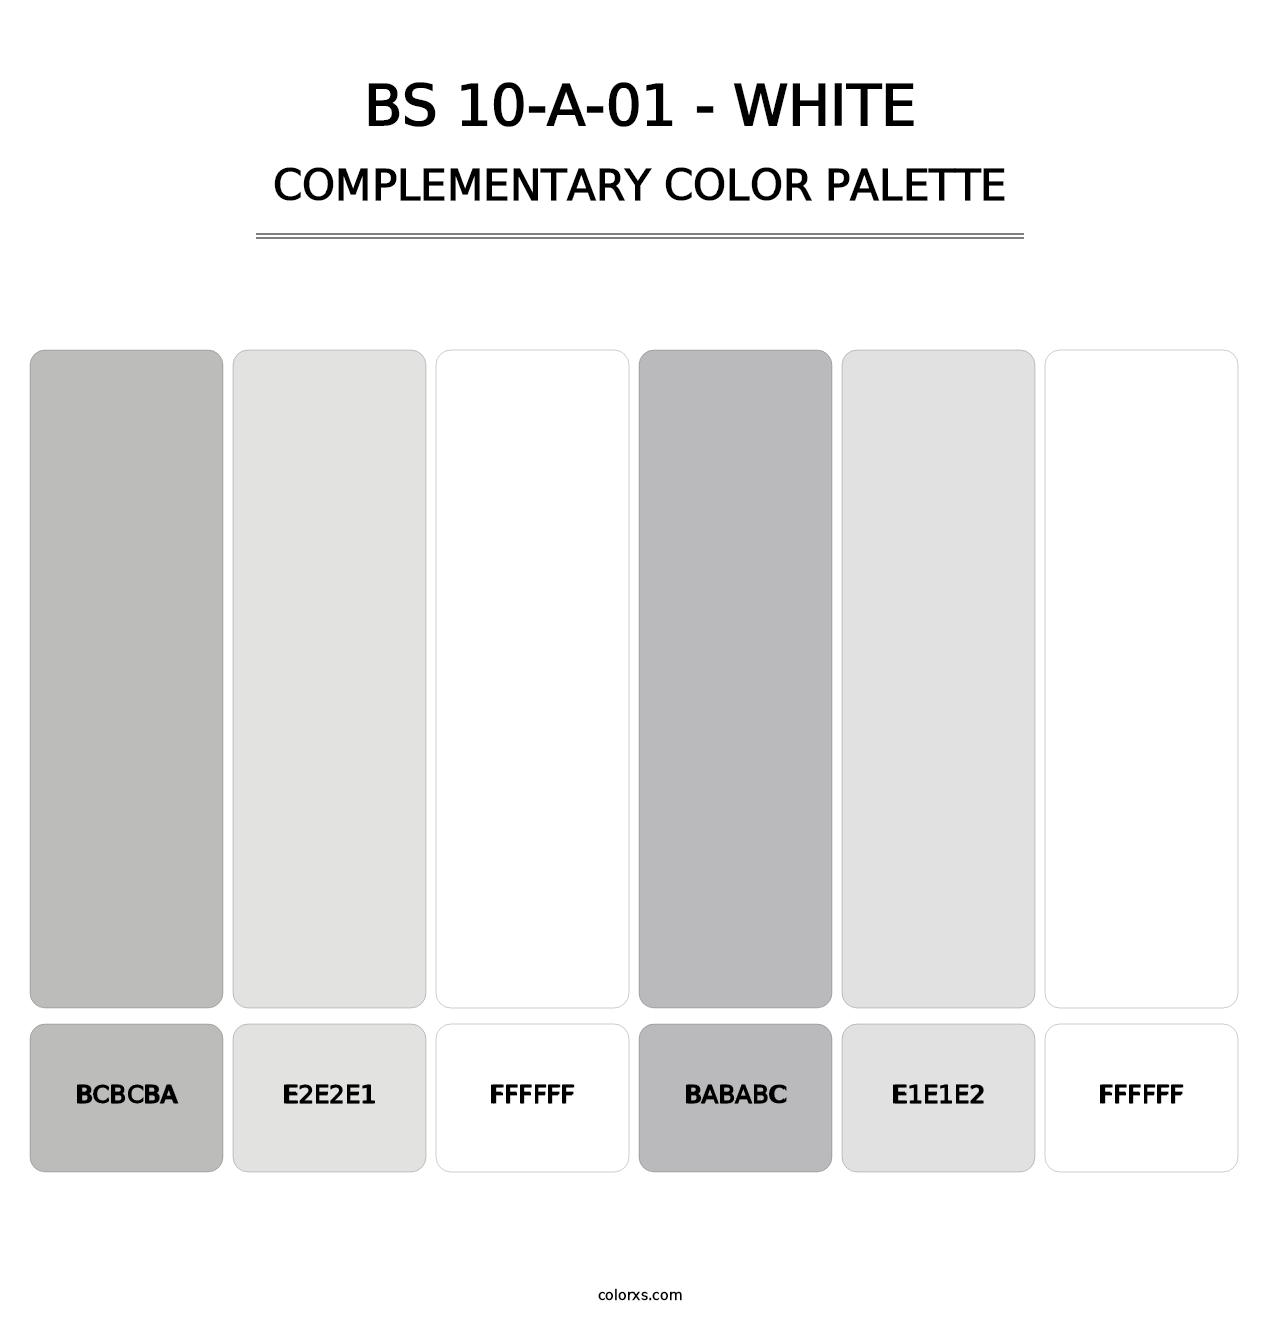 BS 10-A-01 - White - Complementary Color Palette